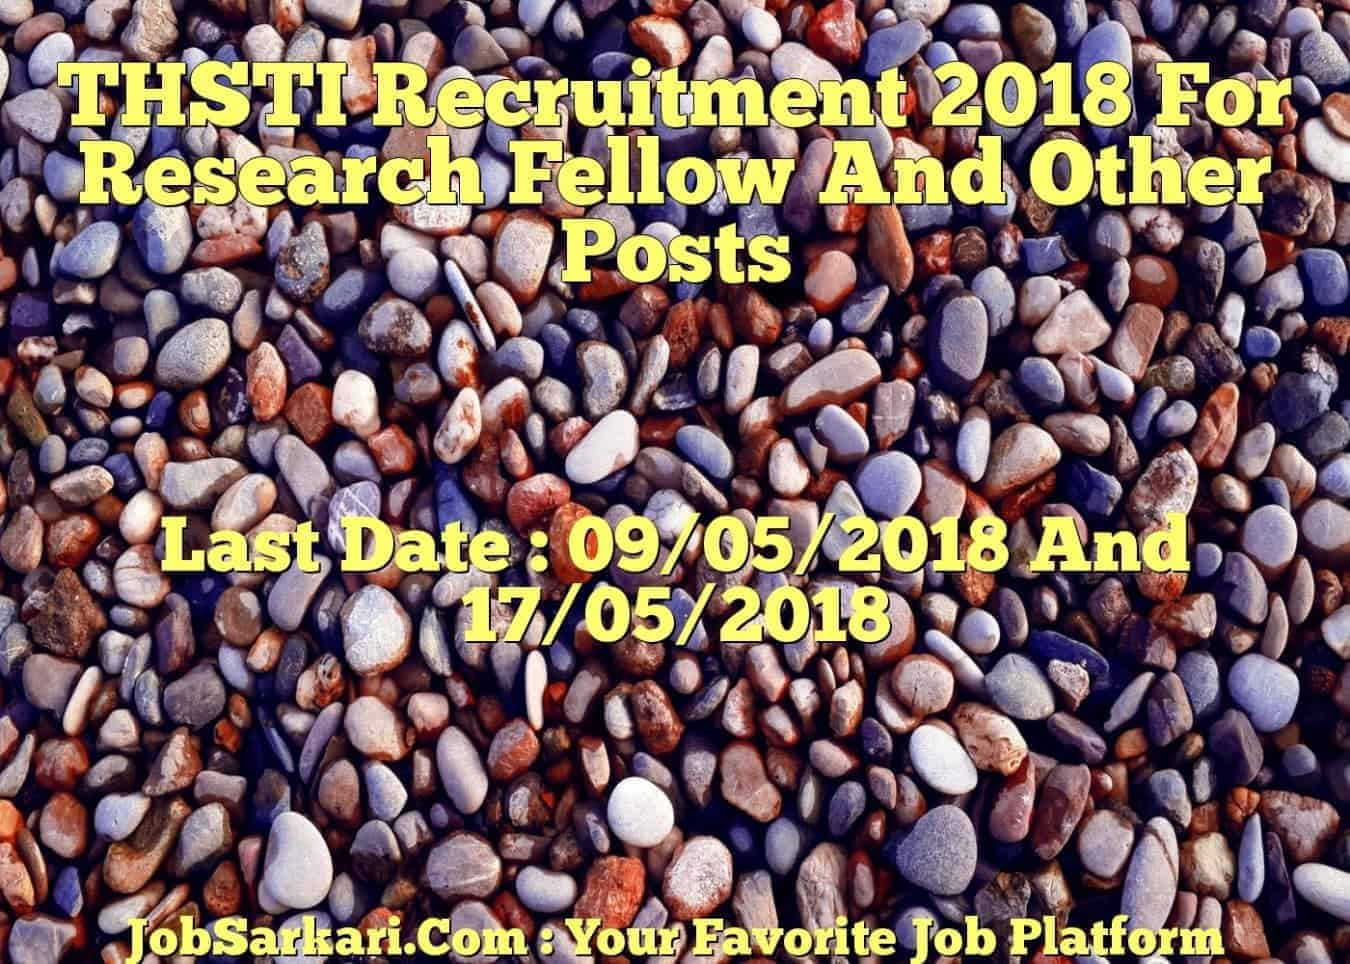 THSTI Recruitment 2018 For Research Fellow And Other Posts